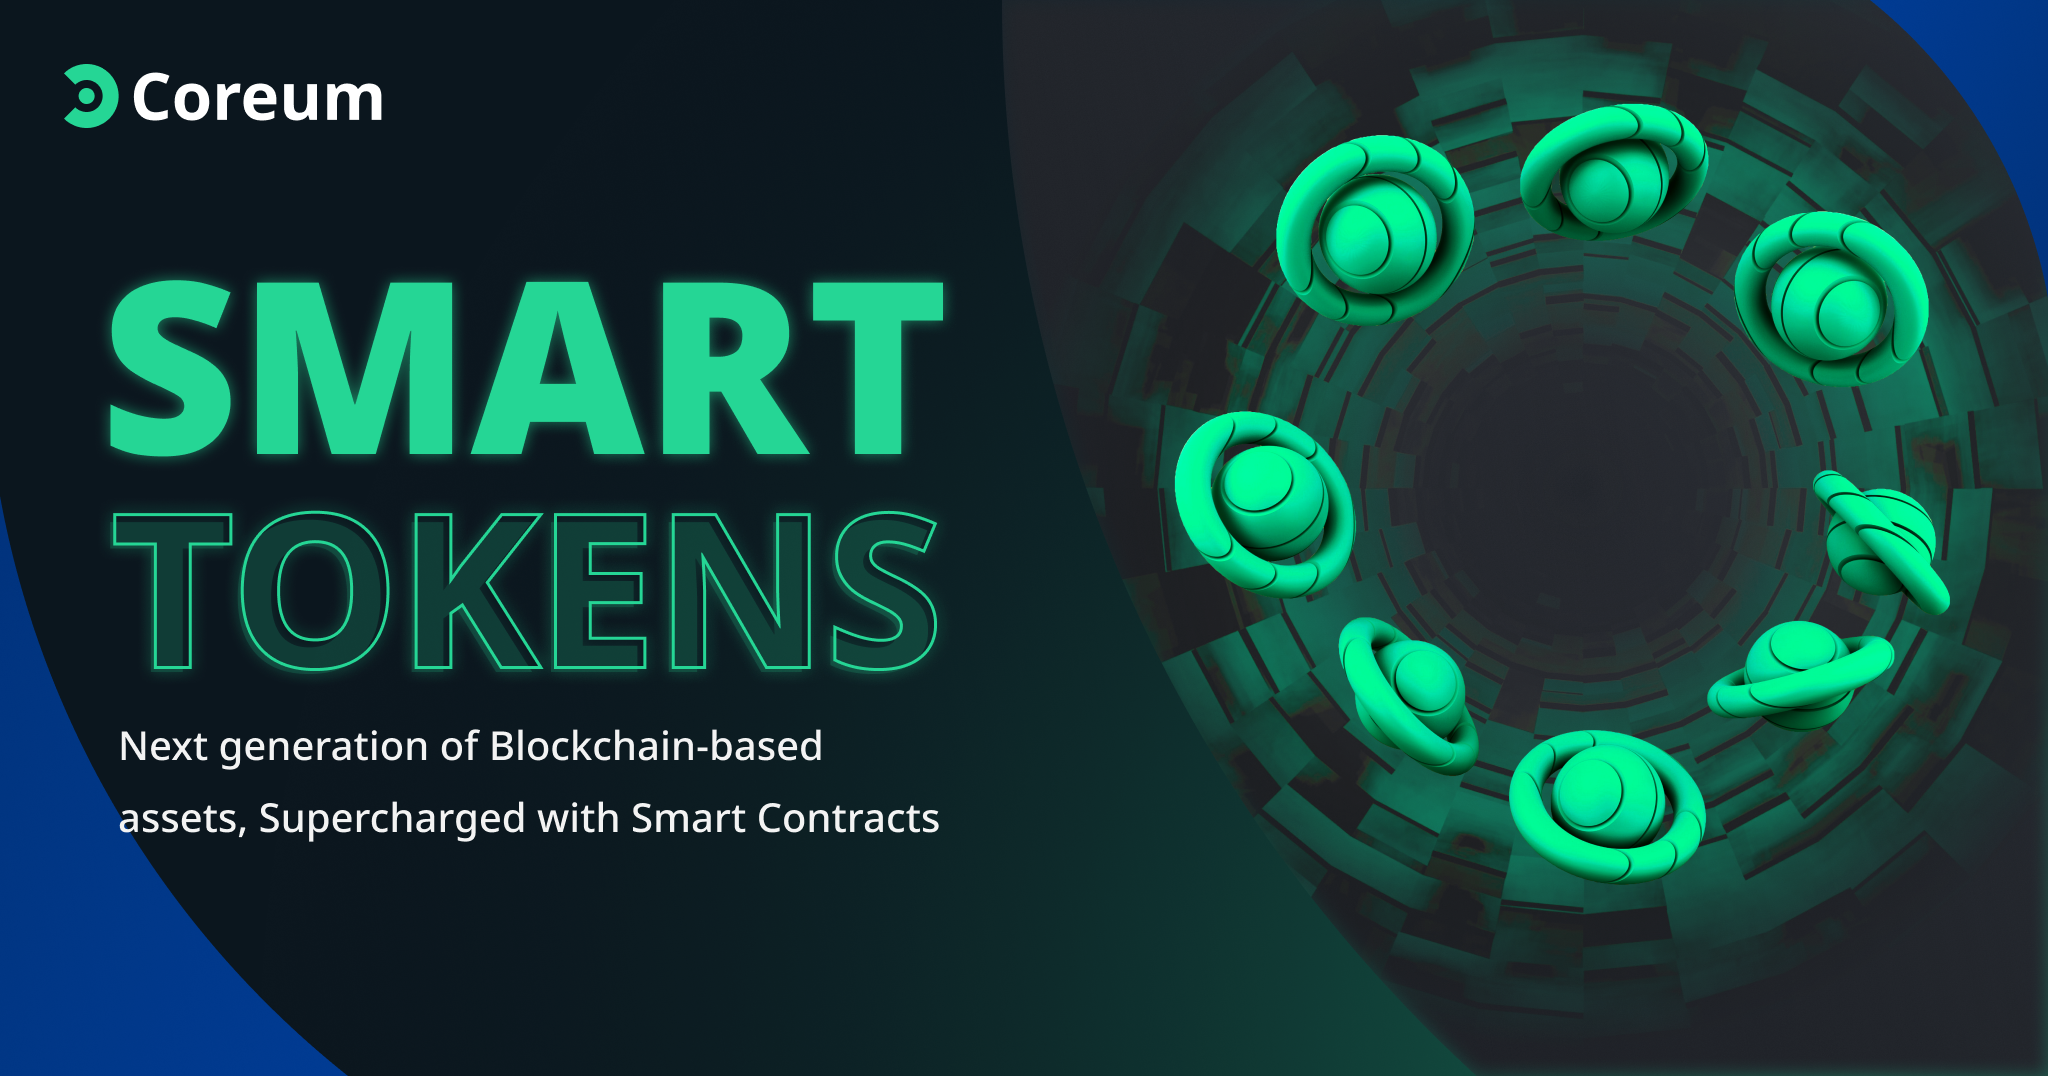 Coreum Introduces “Smart Tokens” – Next Generation of Blockchain-based Assets, Supercharged with Smart Contracts